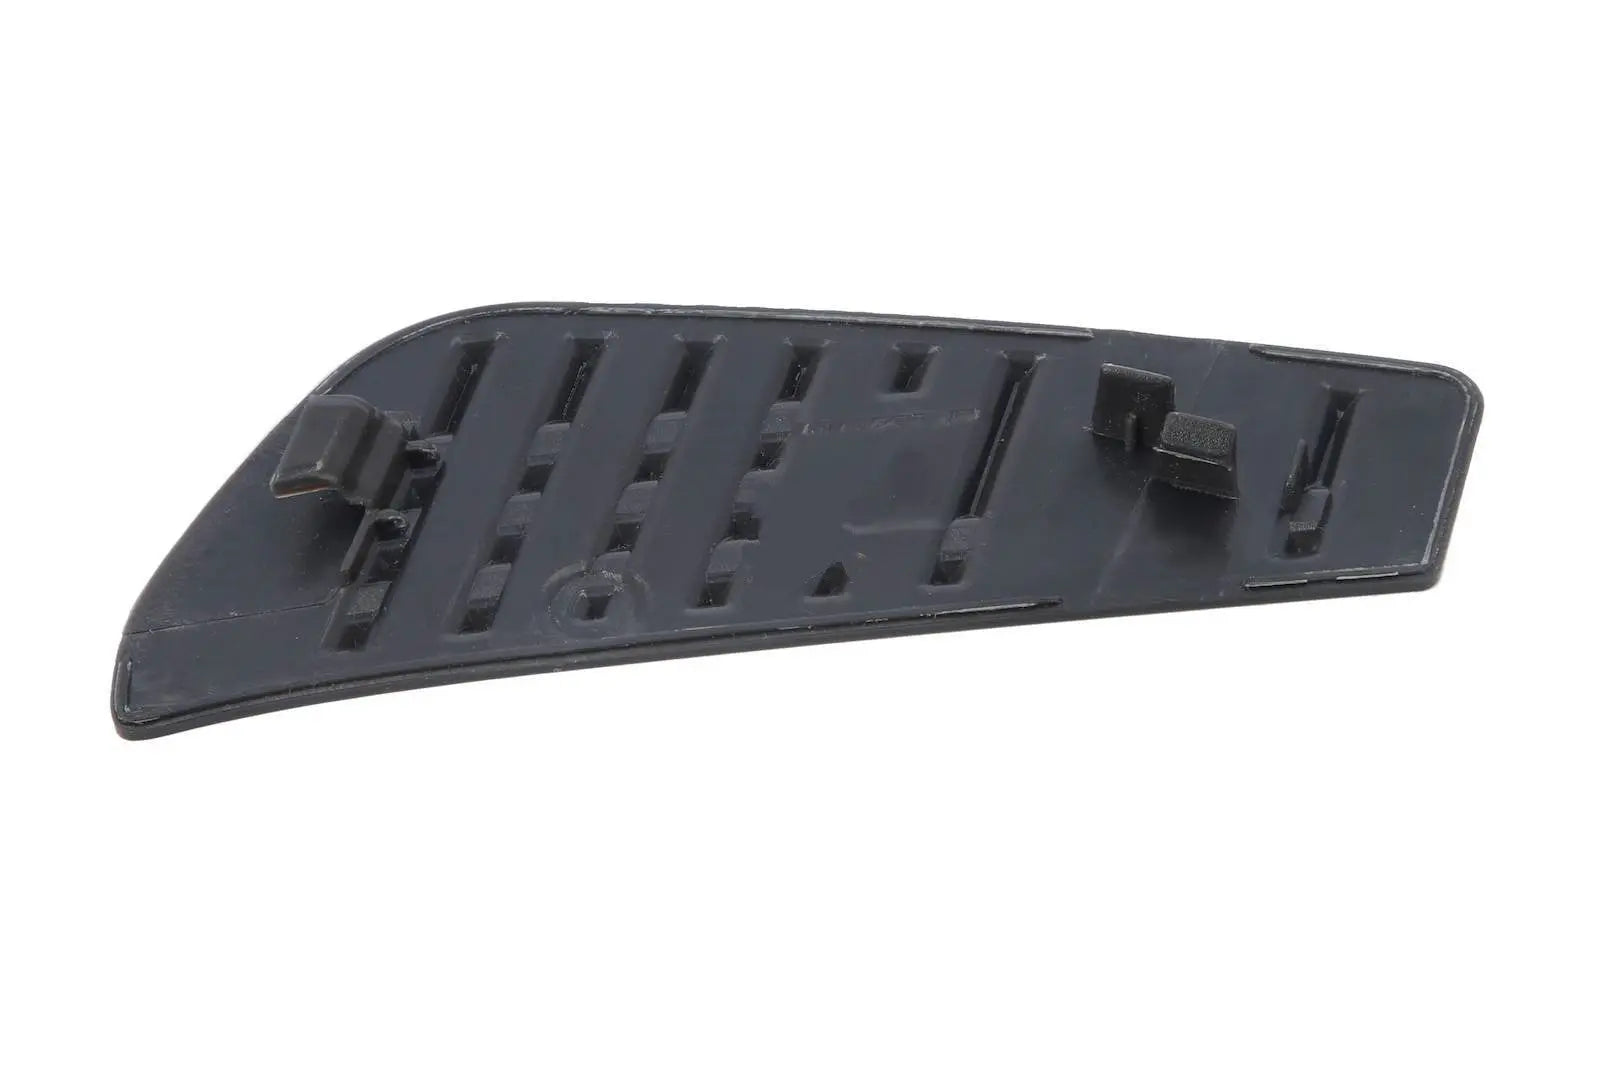 CHINA Factory Wholesale 9606662528 A9606662528 Plate Step Right For MERCEDES BENZ FANCHANTS China Auto Parts Wholesales